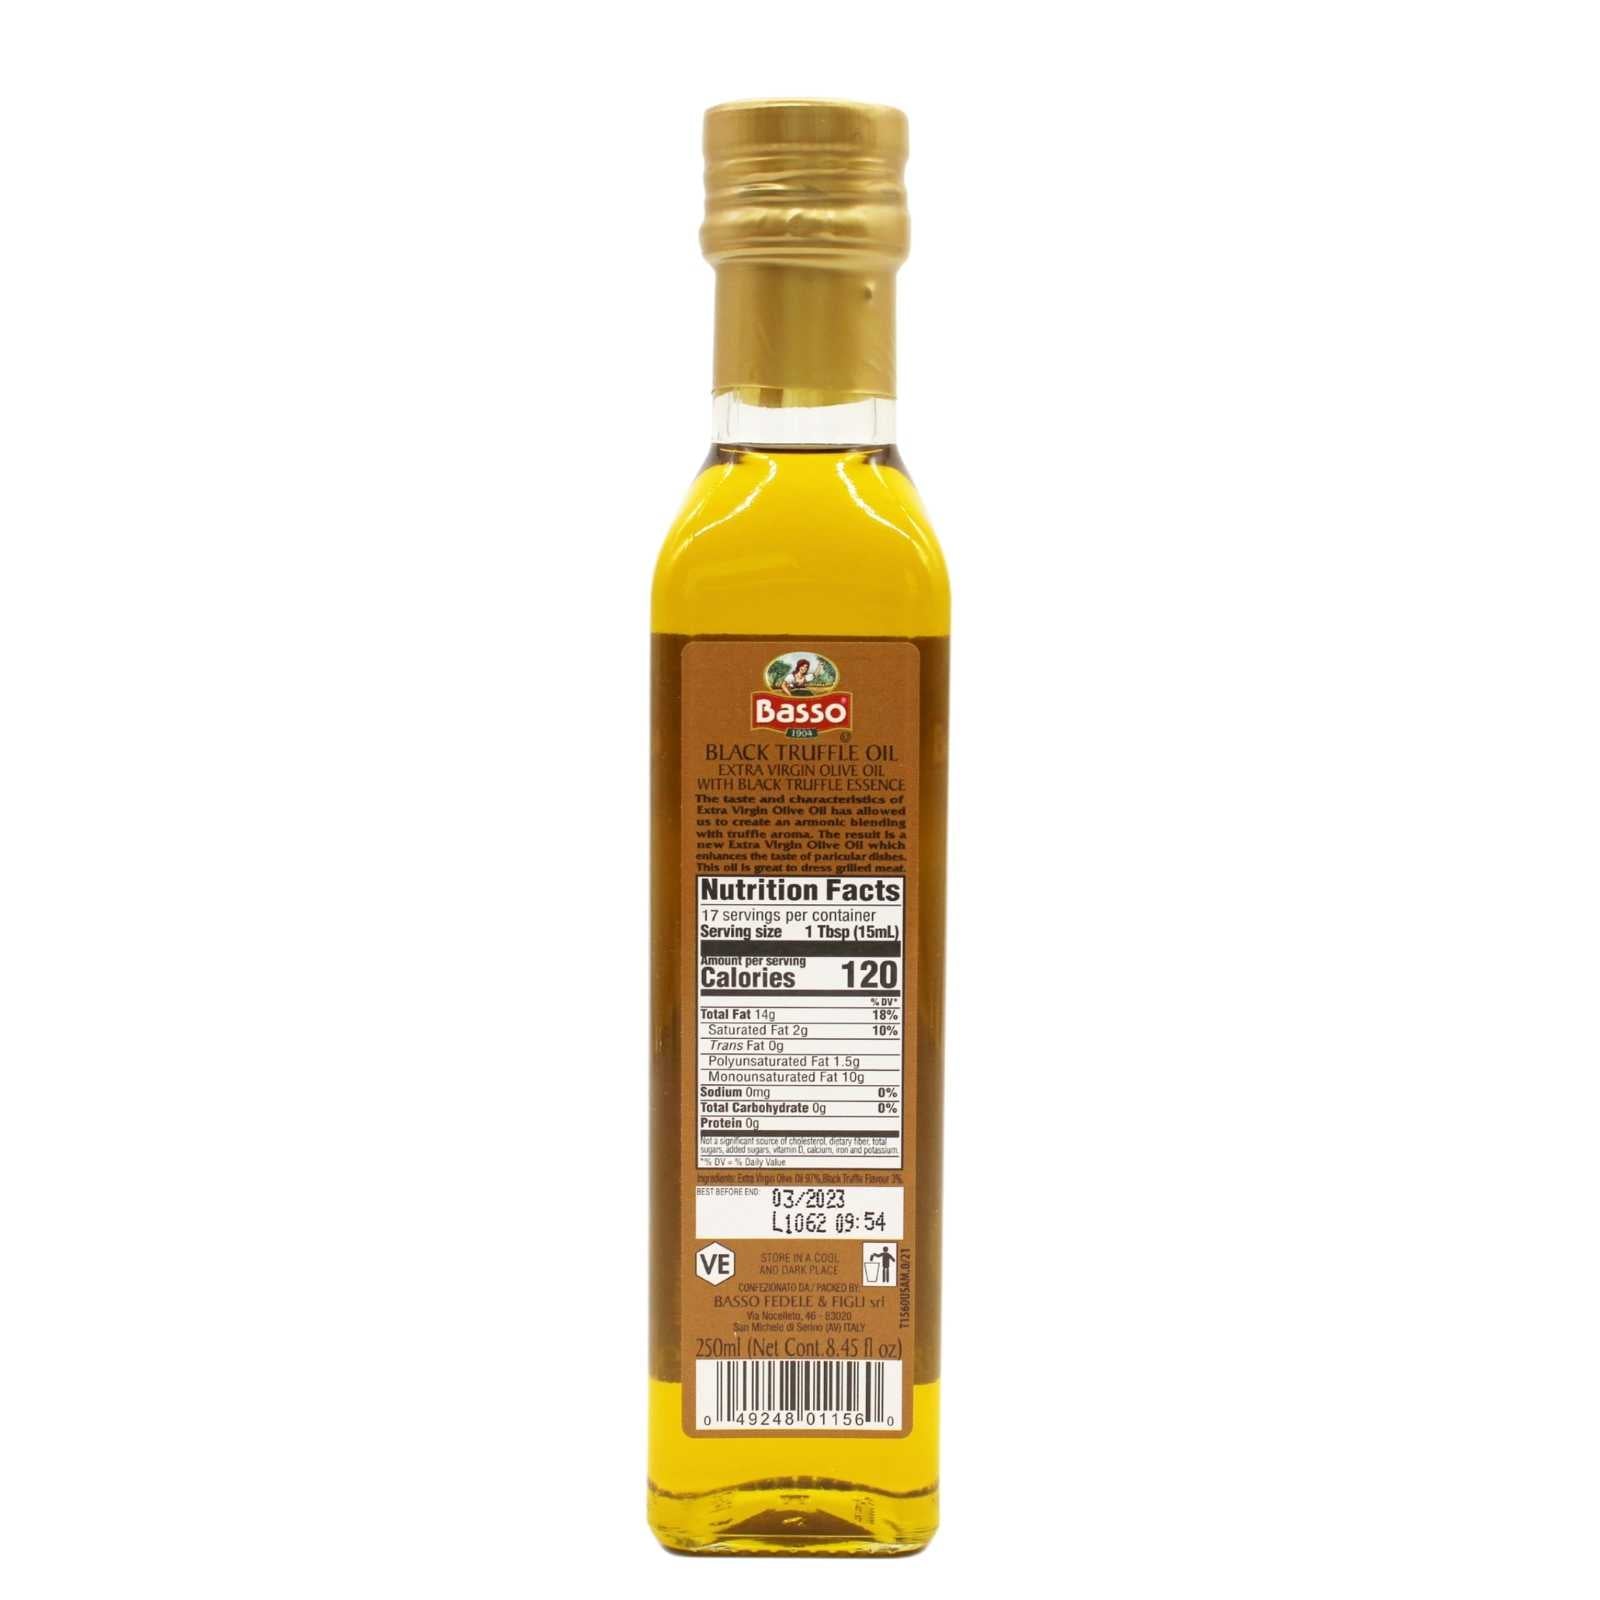 Basso Black Truffle Extra Virgin Olive Oil |  8.5oz (250 ml) nutritional facts